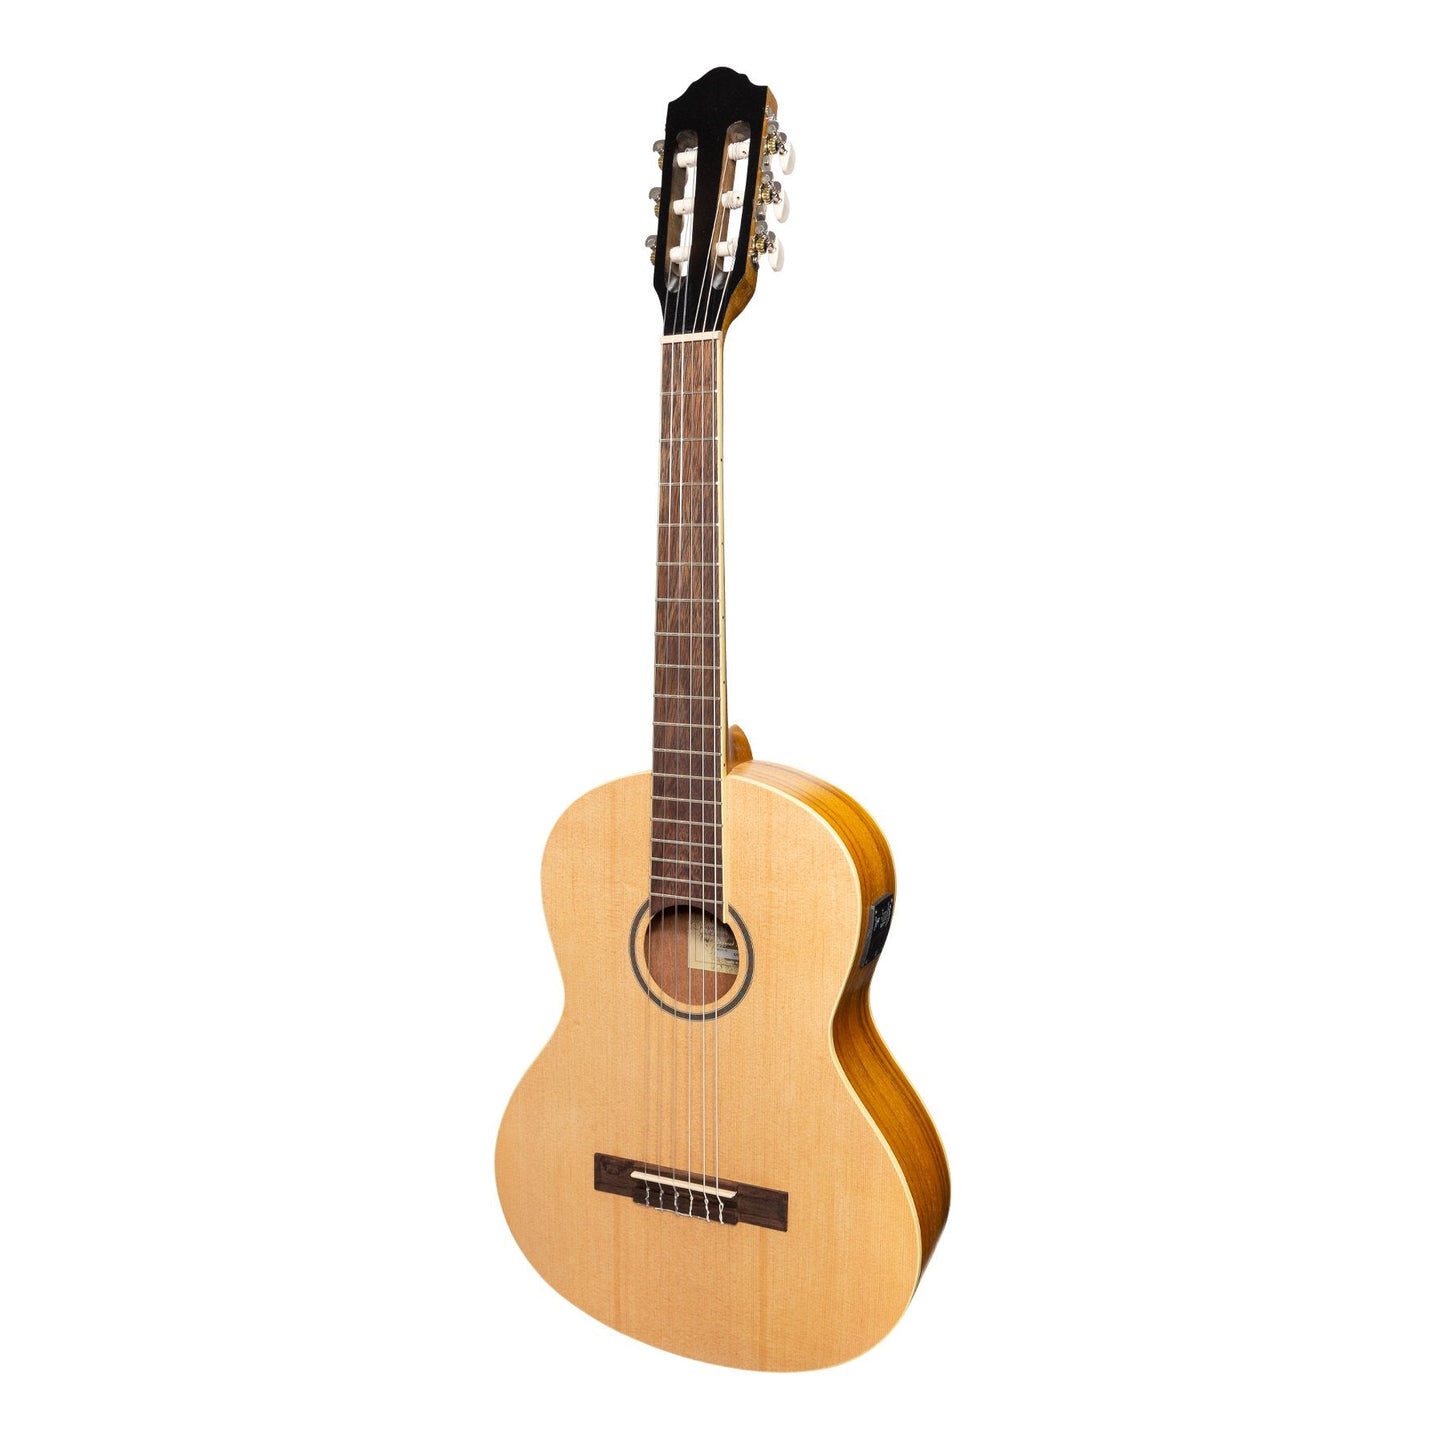 Martinez 'Slim Jim' Left Handed 3/4 Size Student Classical Guitar with Built In Tuner (Spruce/Koa)